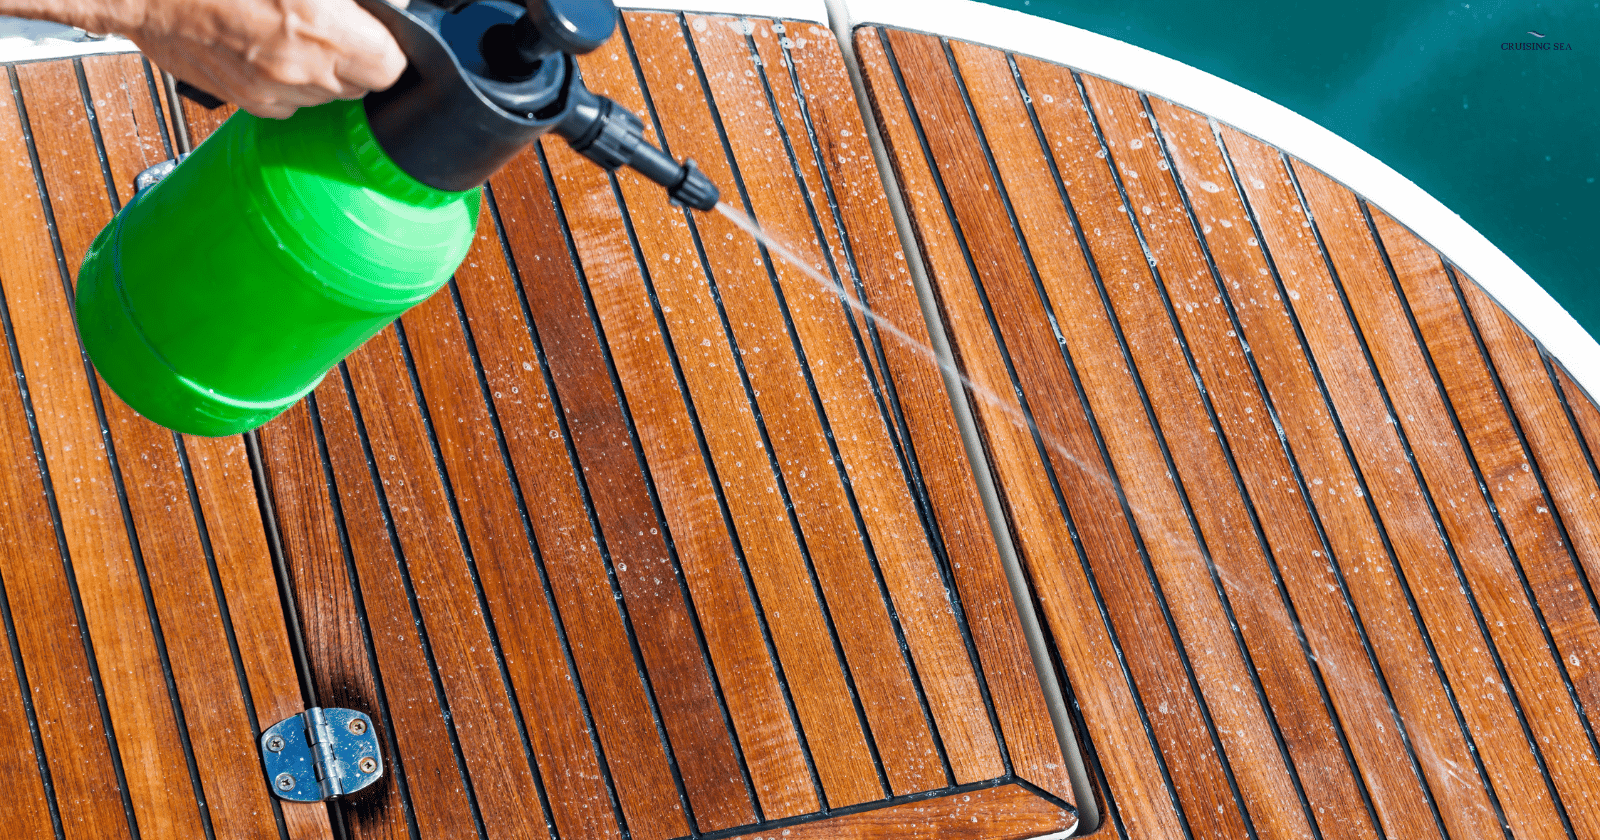 How to clean teak deck on a boat